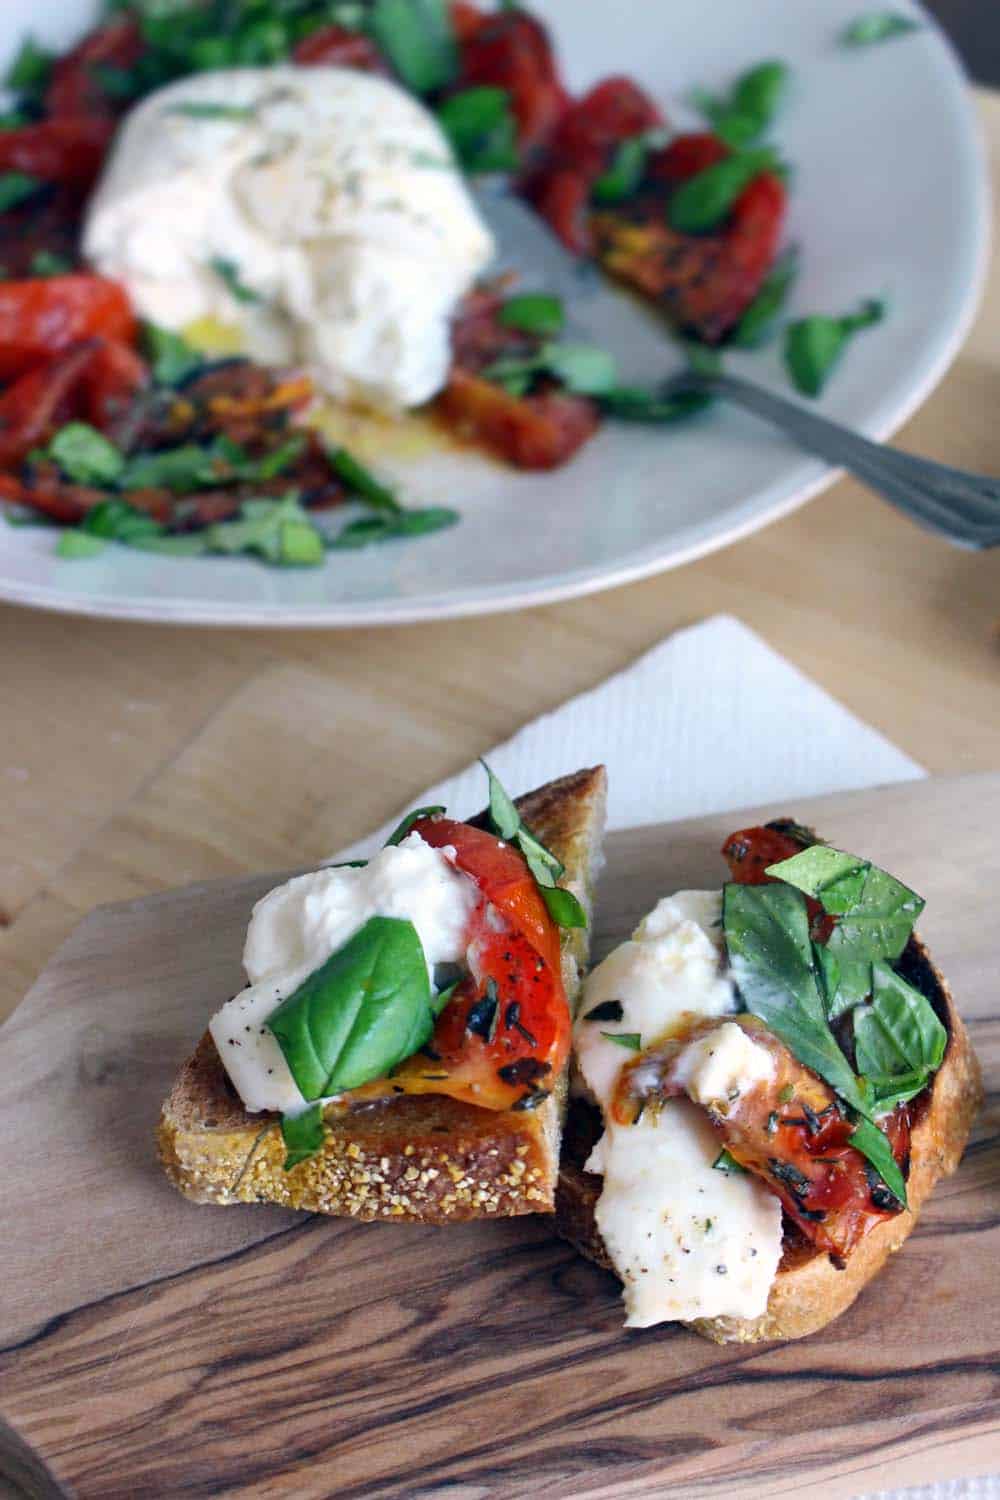 Halved roasted tomato and burrata toast on a wooden cutting board, with a white plate holding recipe ingredients in the background.